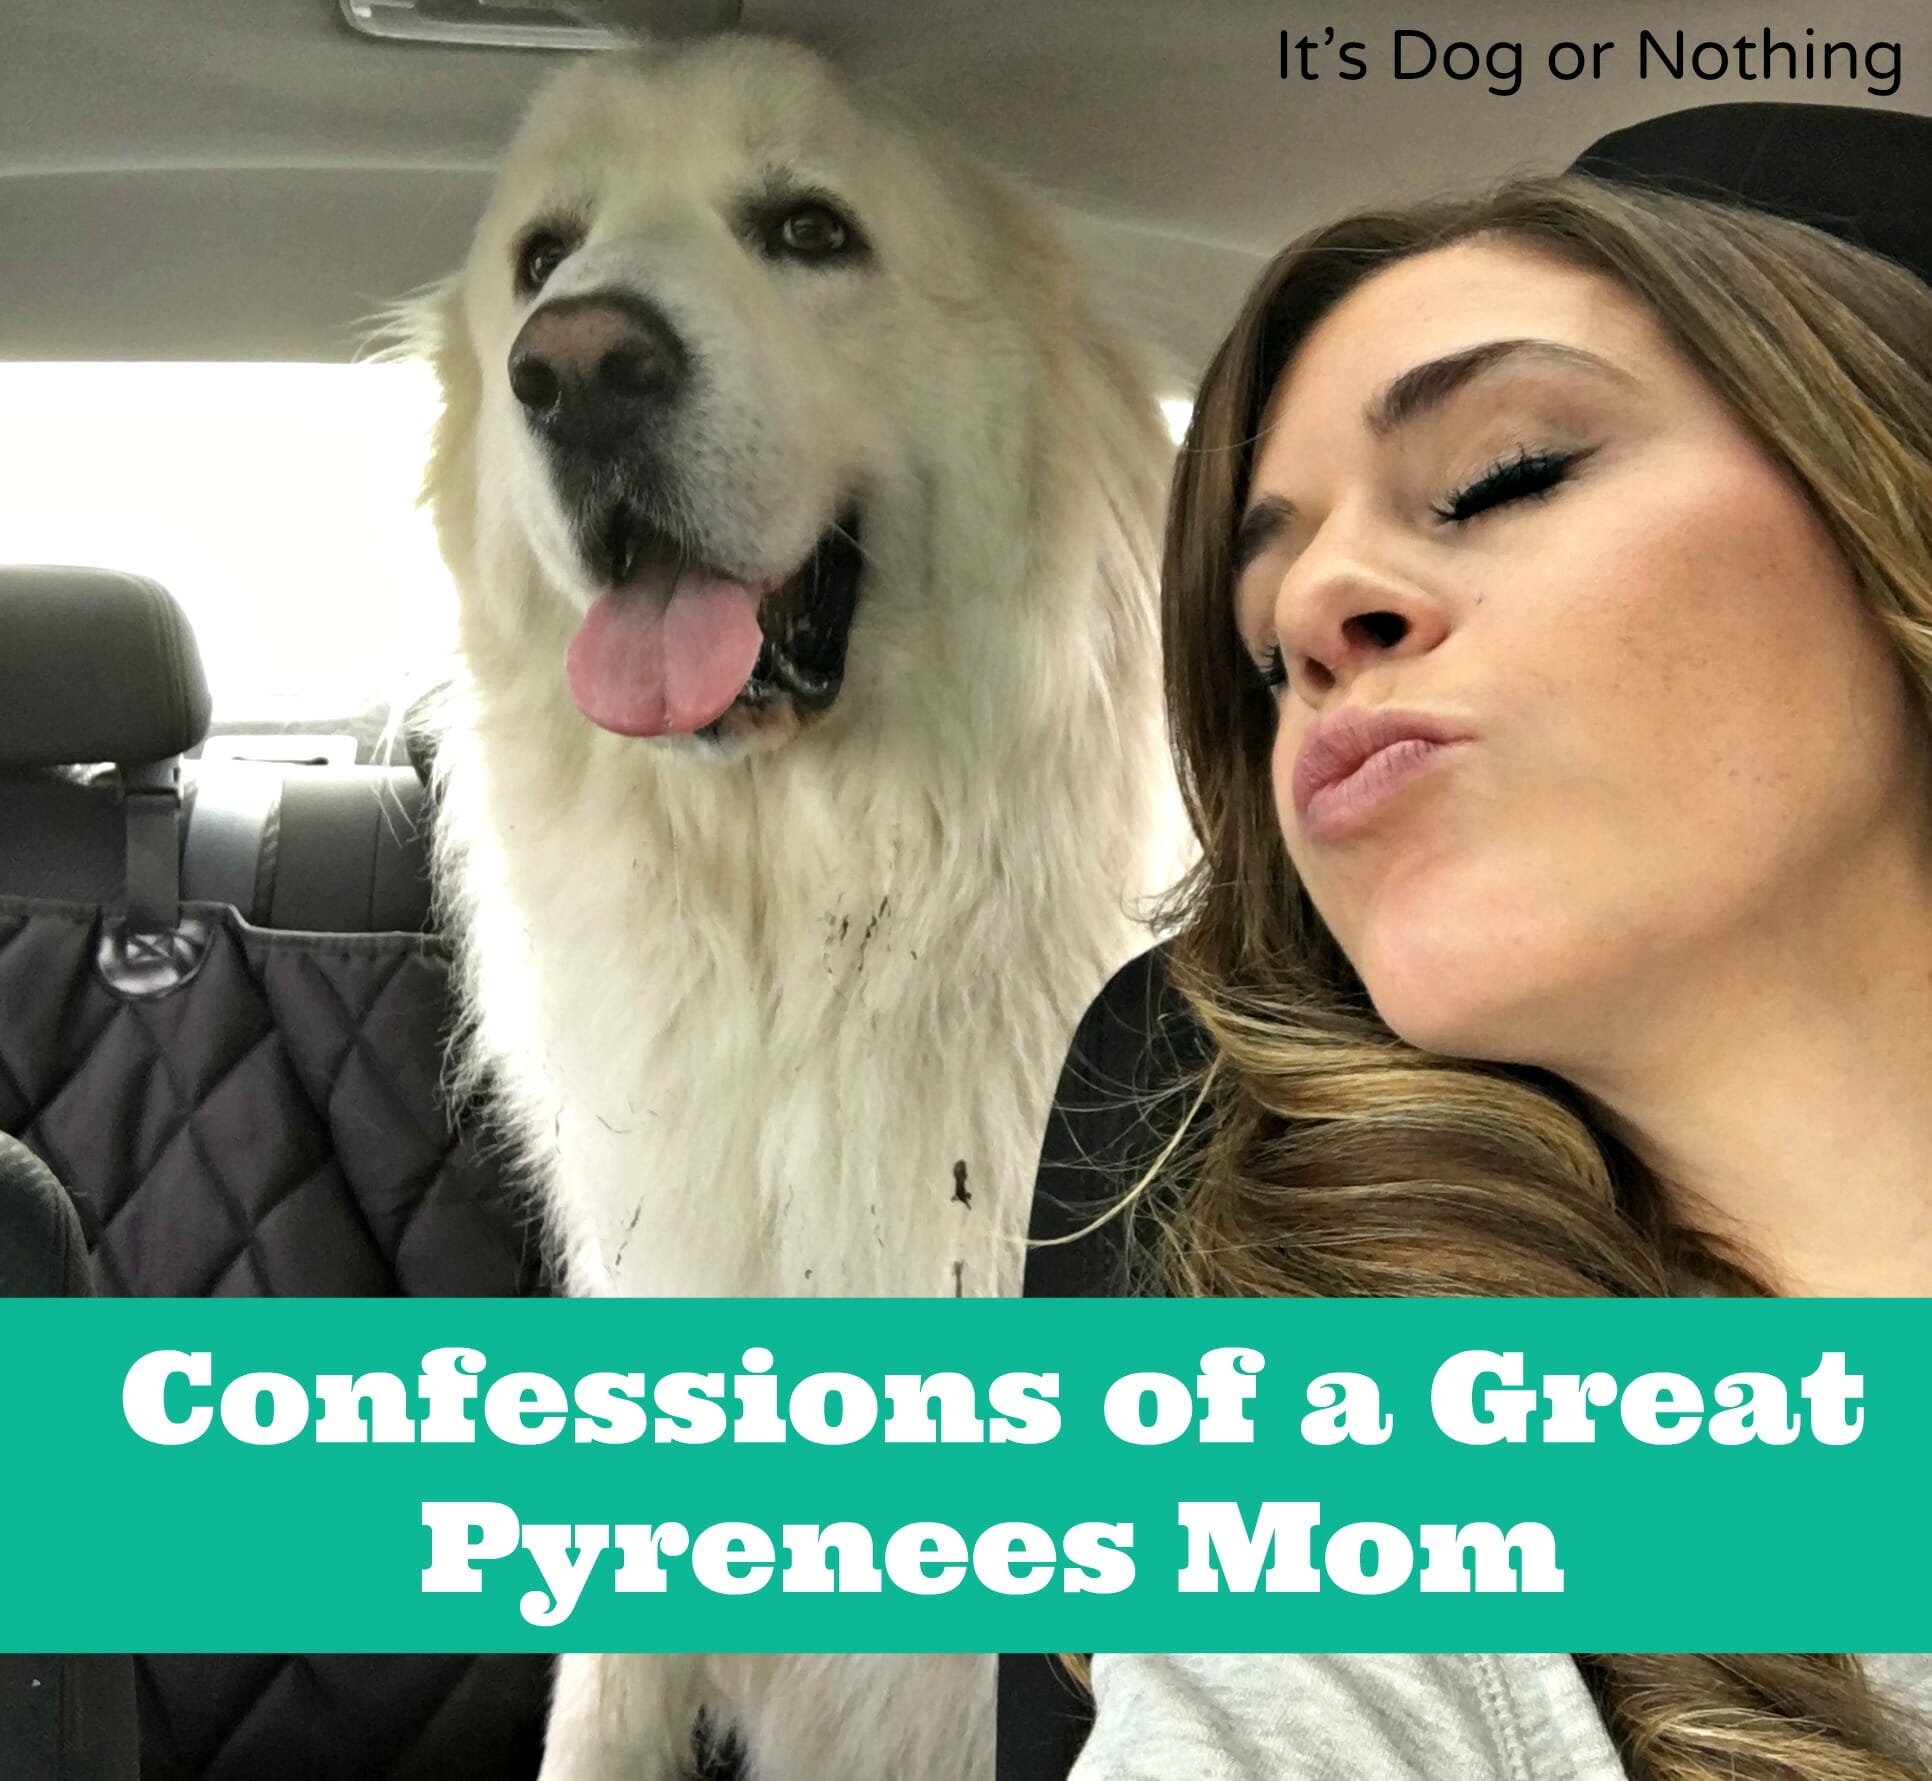 Confessions of a Great Pyrenees Mom